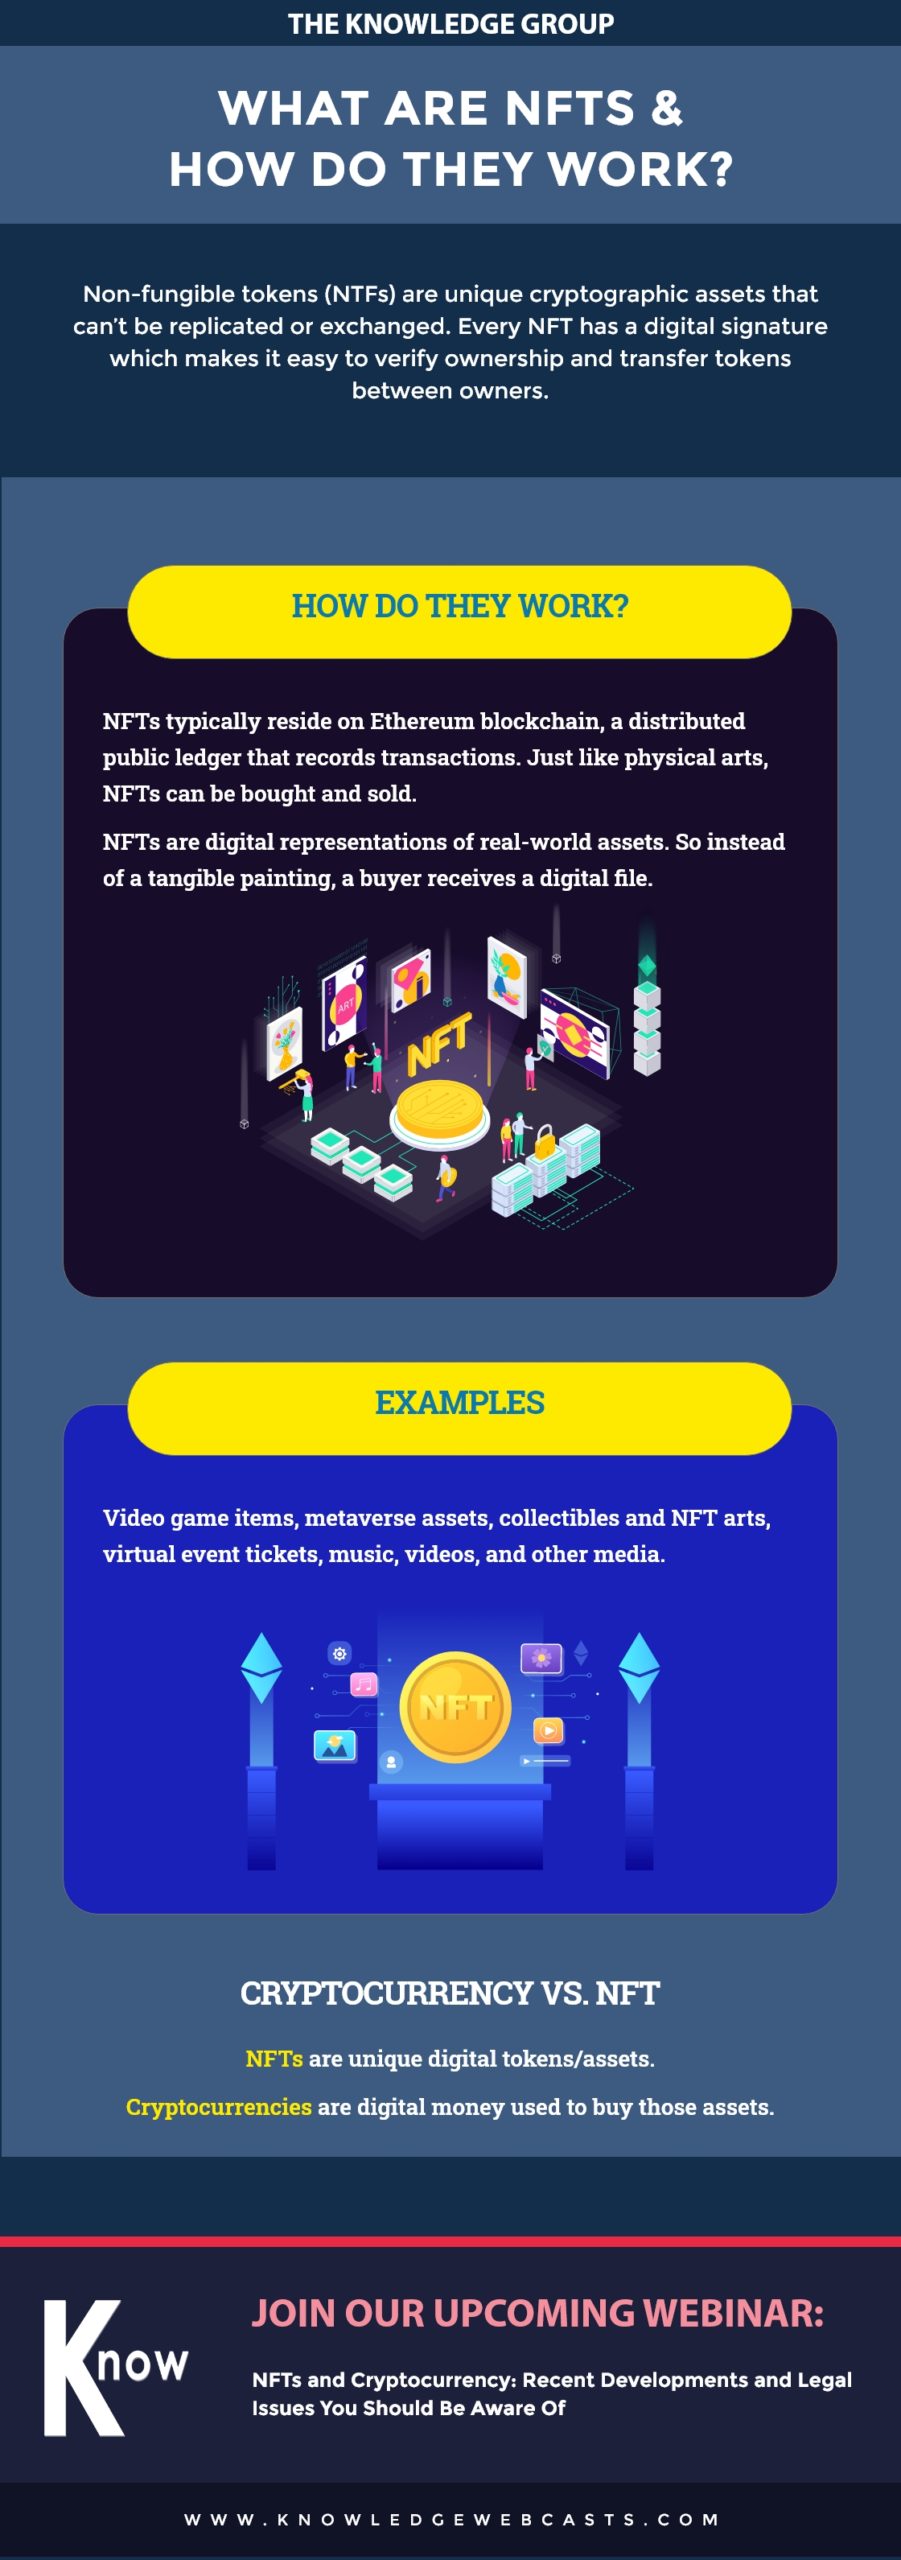 nfts,cryptocurrency,non-fungible tokens